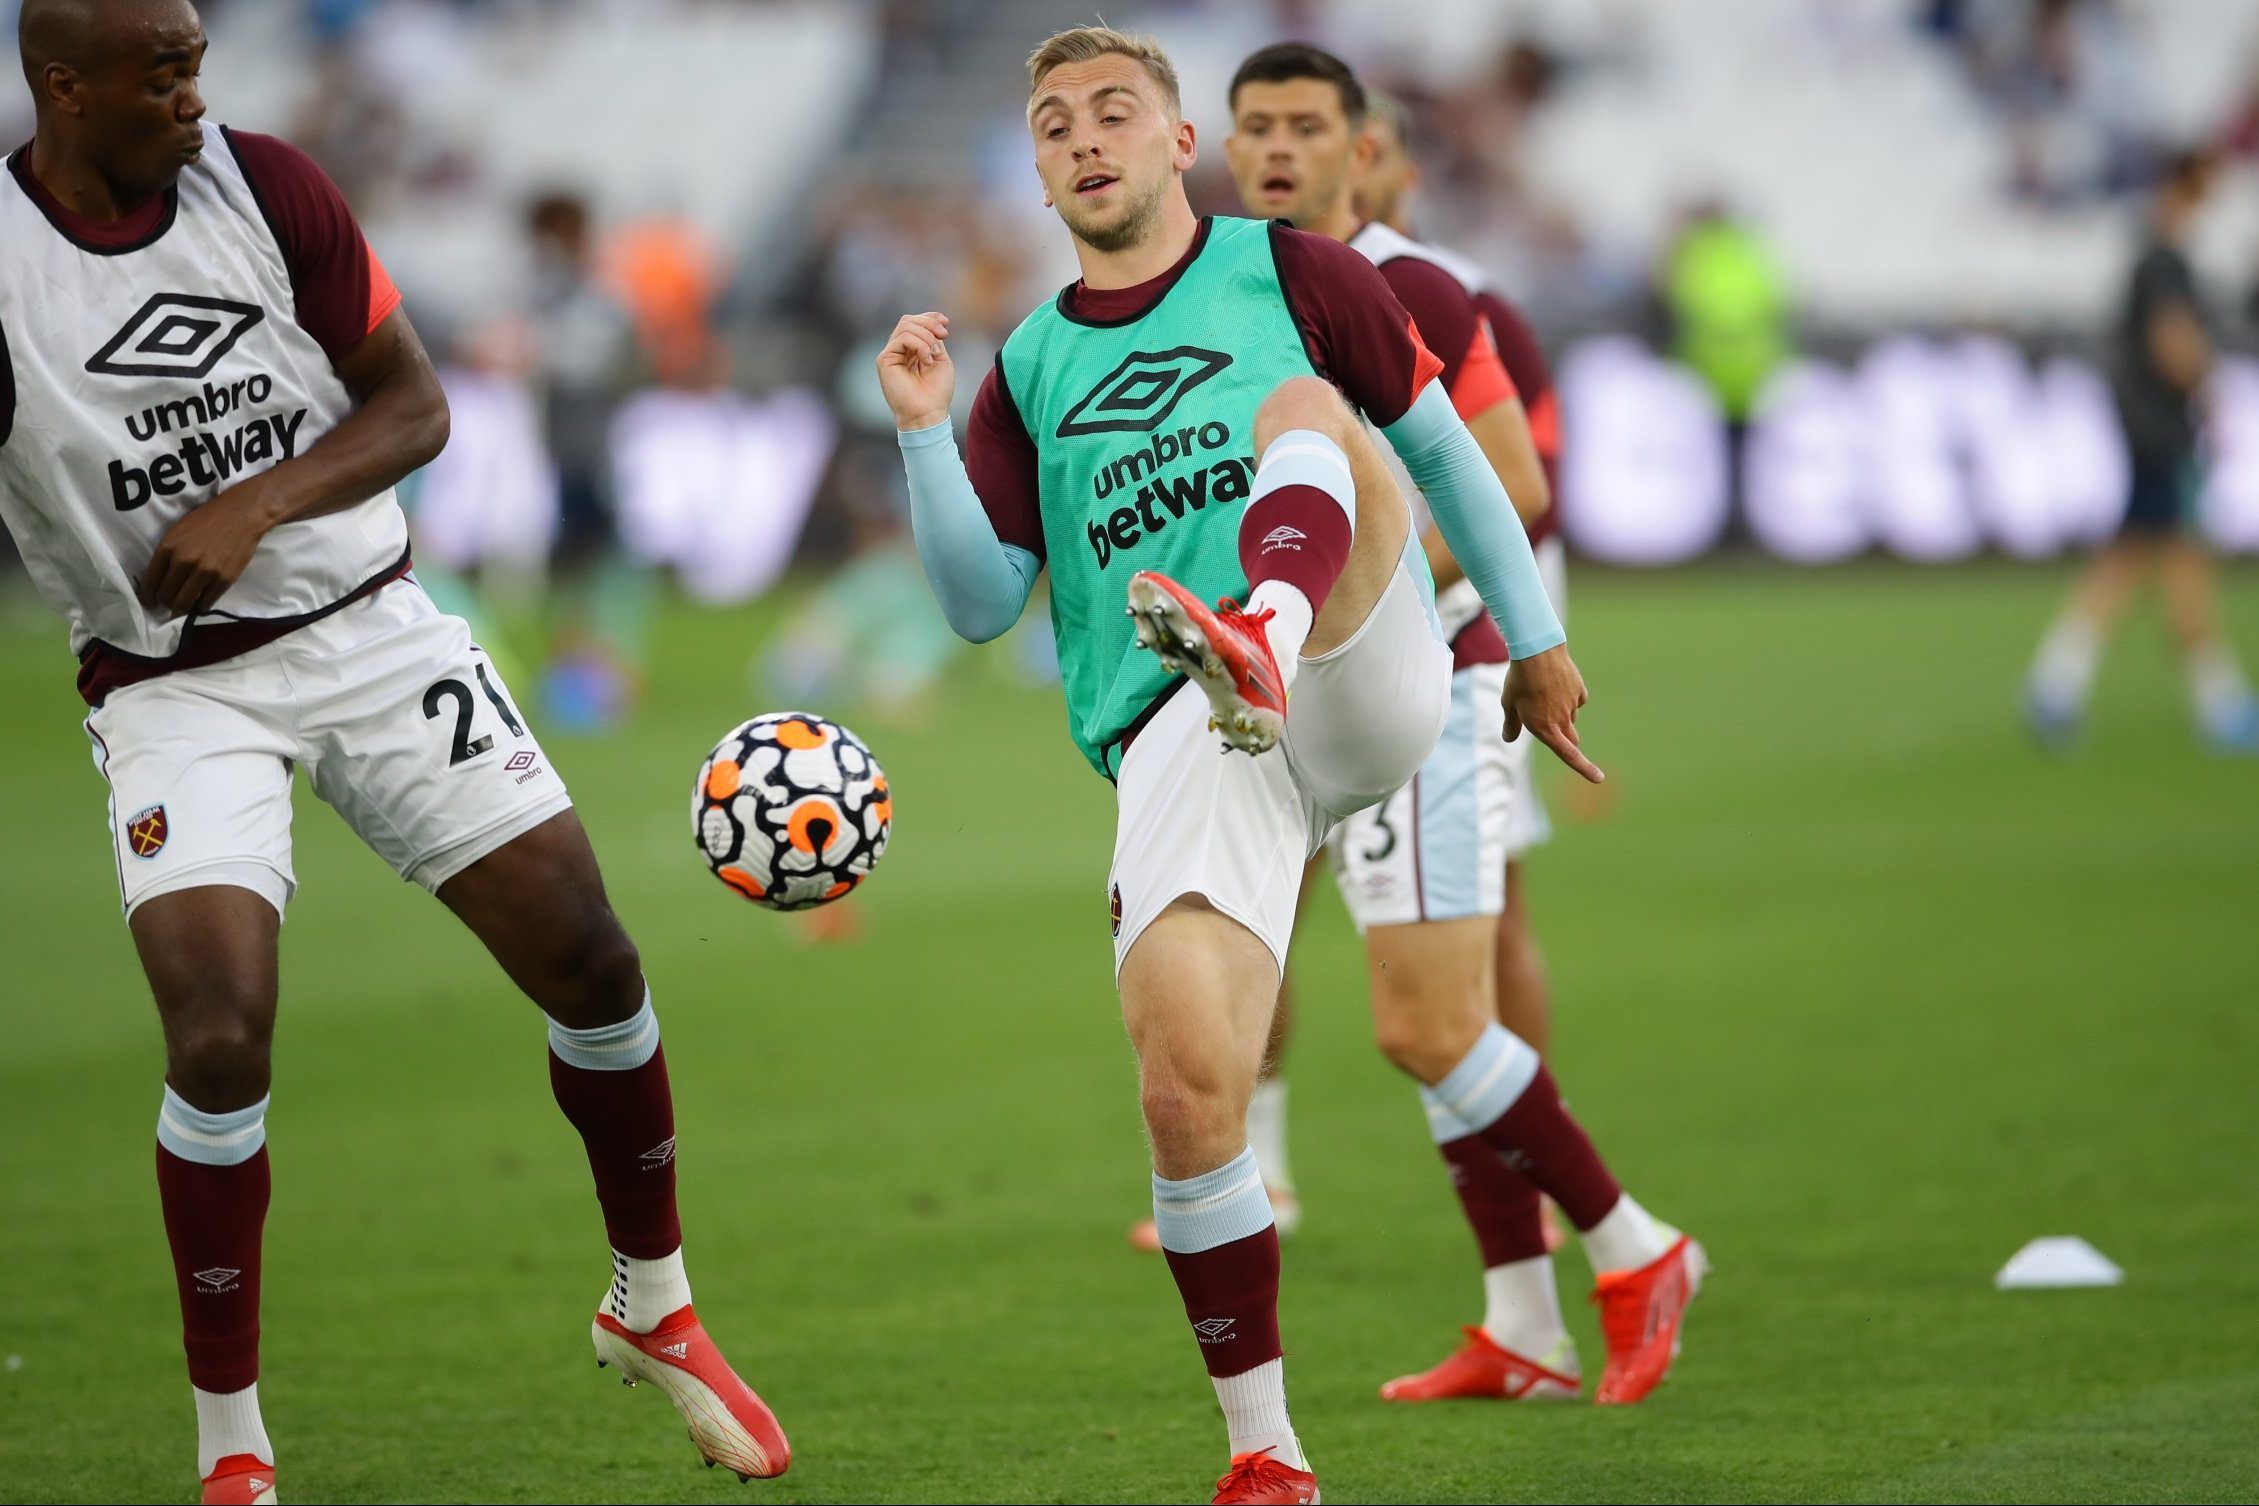 West Ham winger Jarrod Bowen during warm-up before Premier League clash with Leicester City at the London Stadium